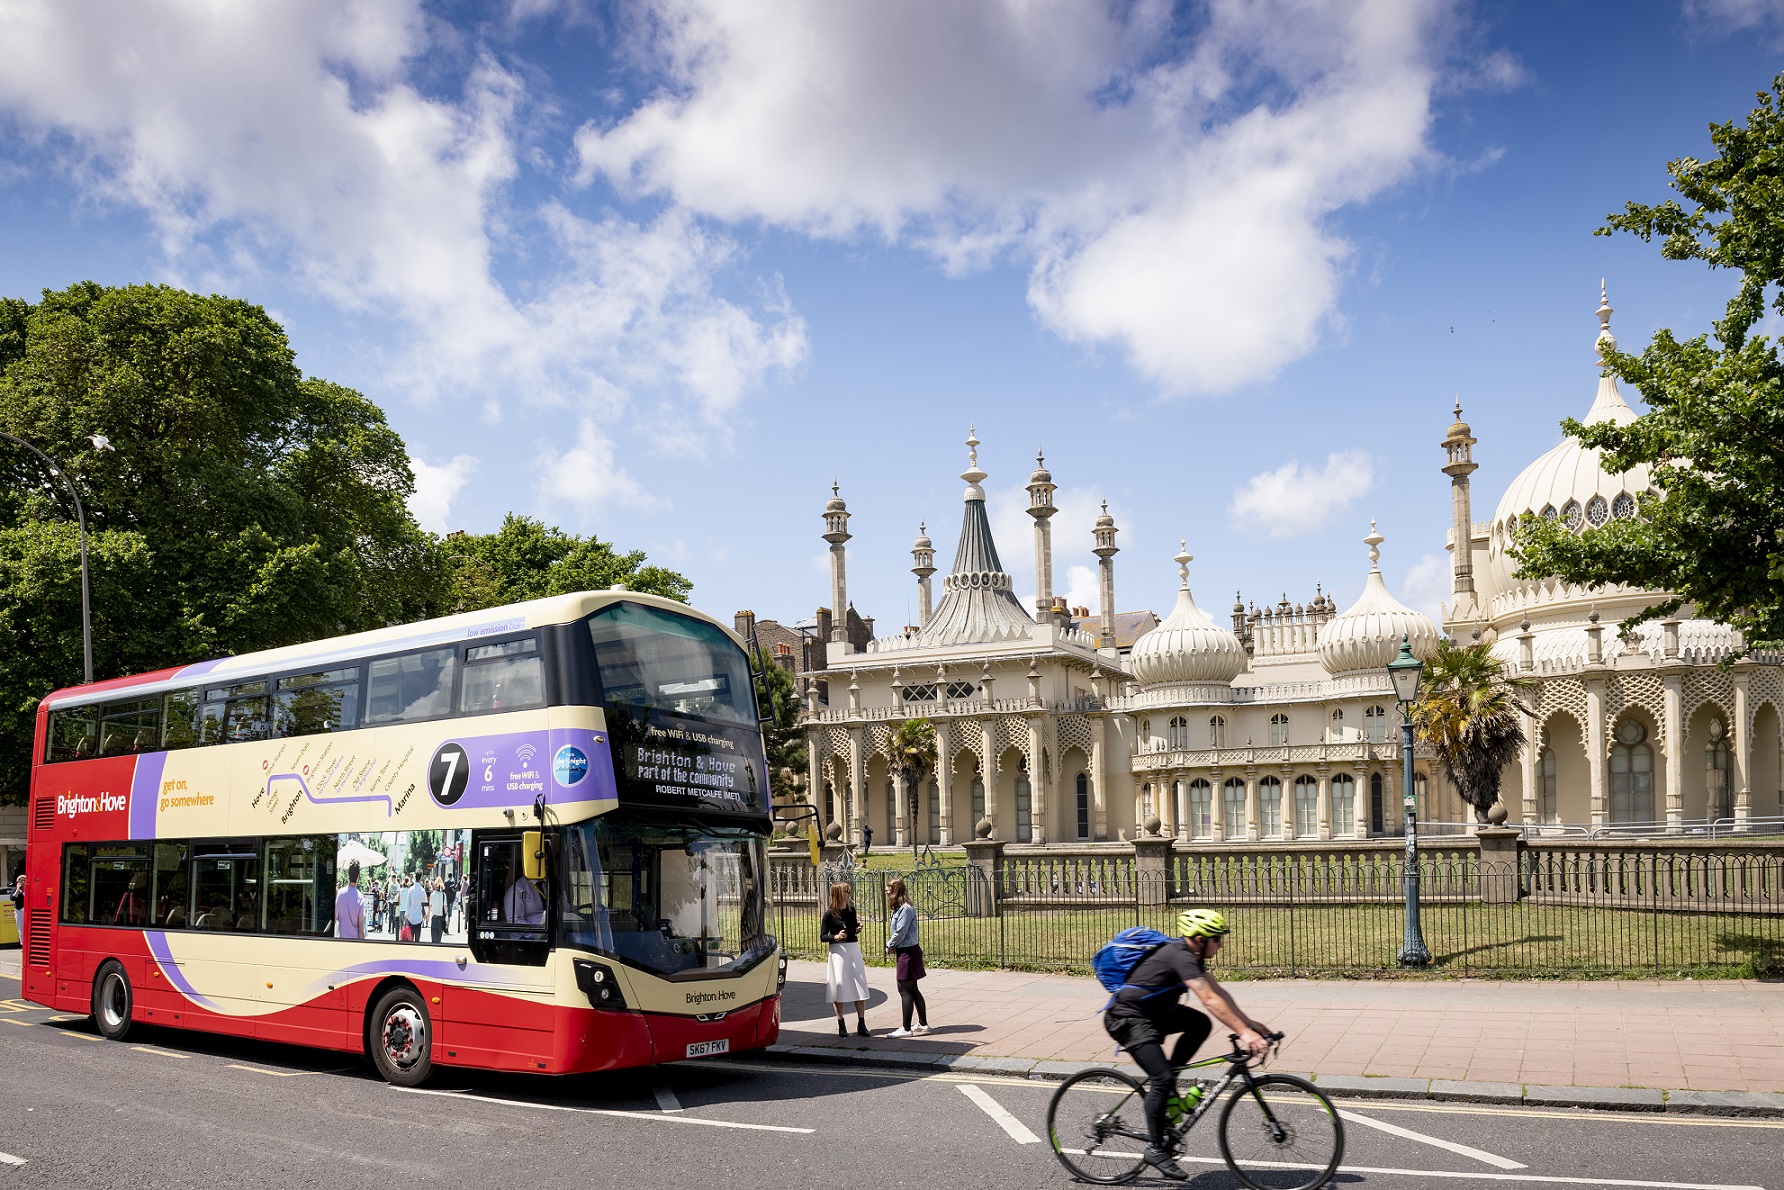 Brighton and Hove and Metrobus offering refugees positions as bus drivers